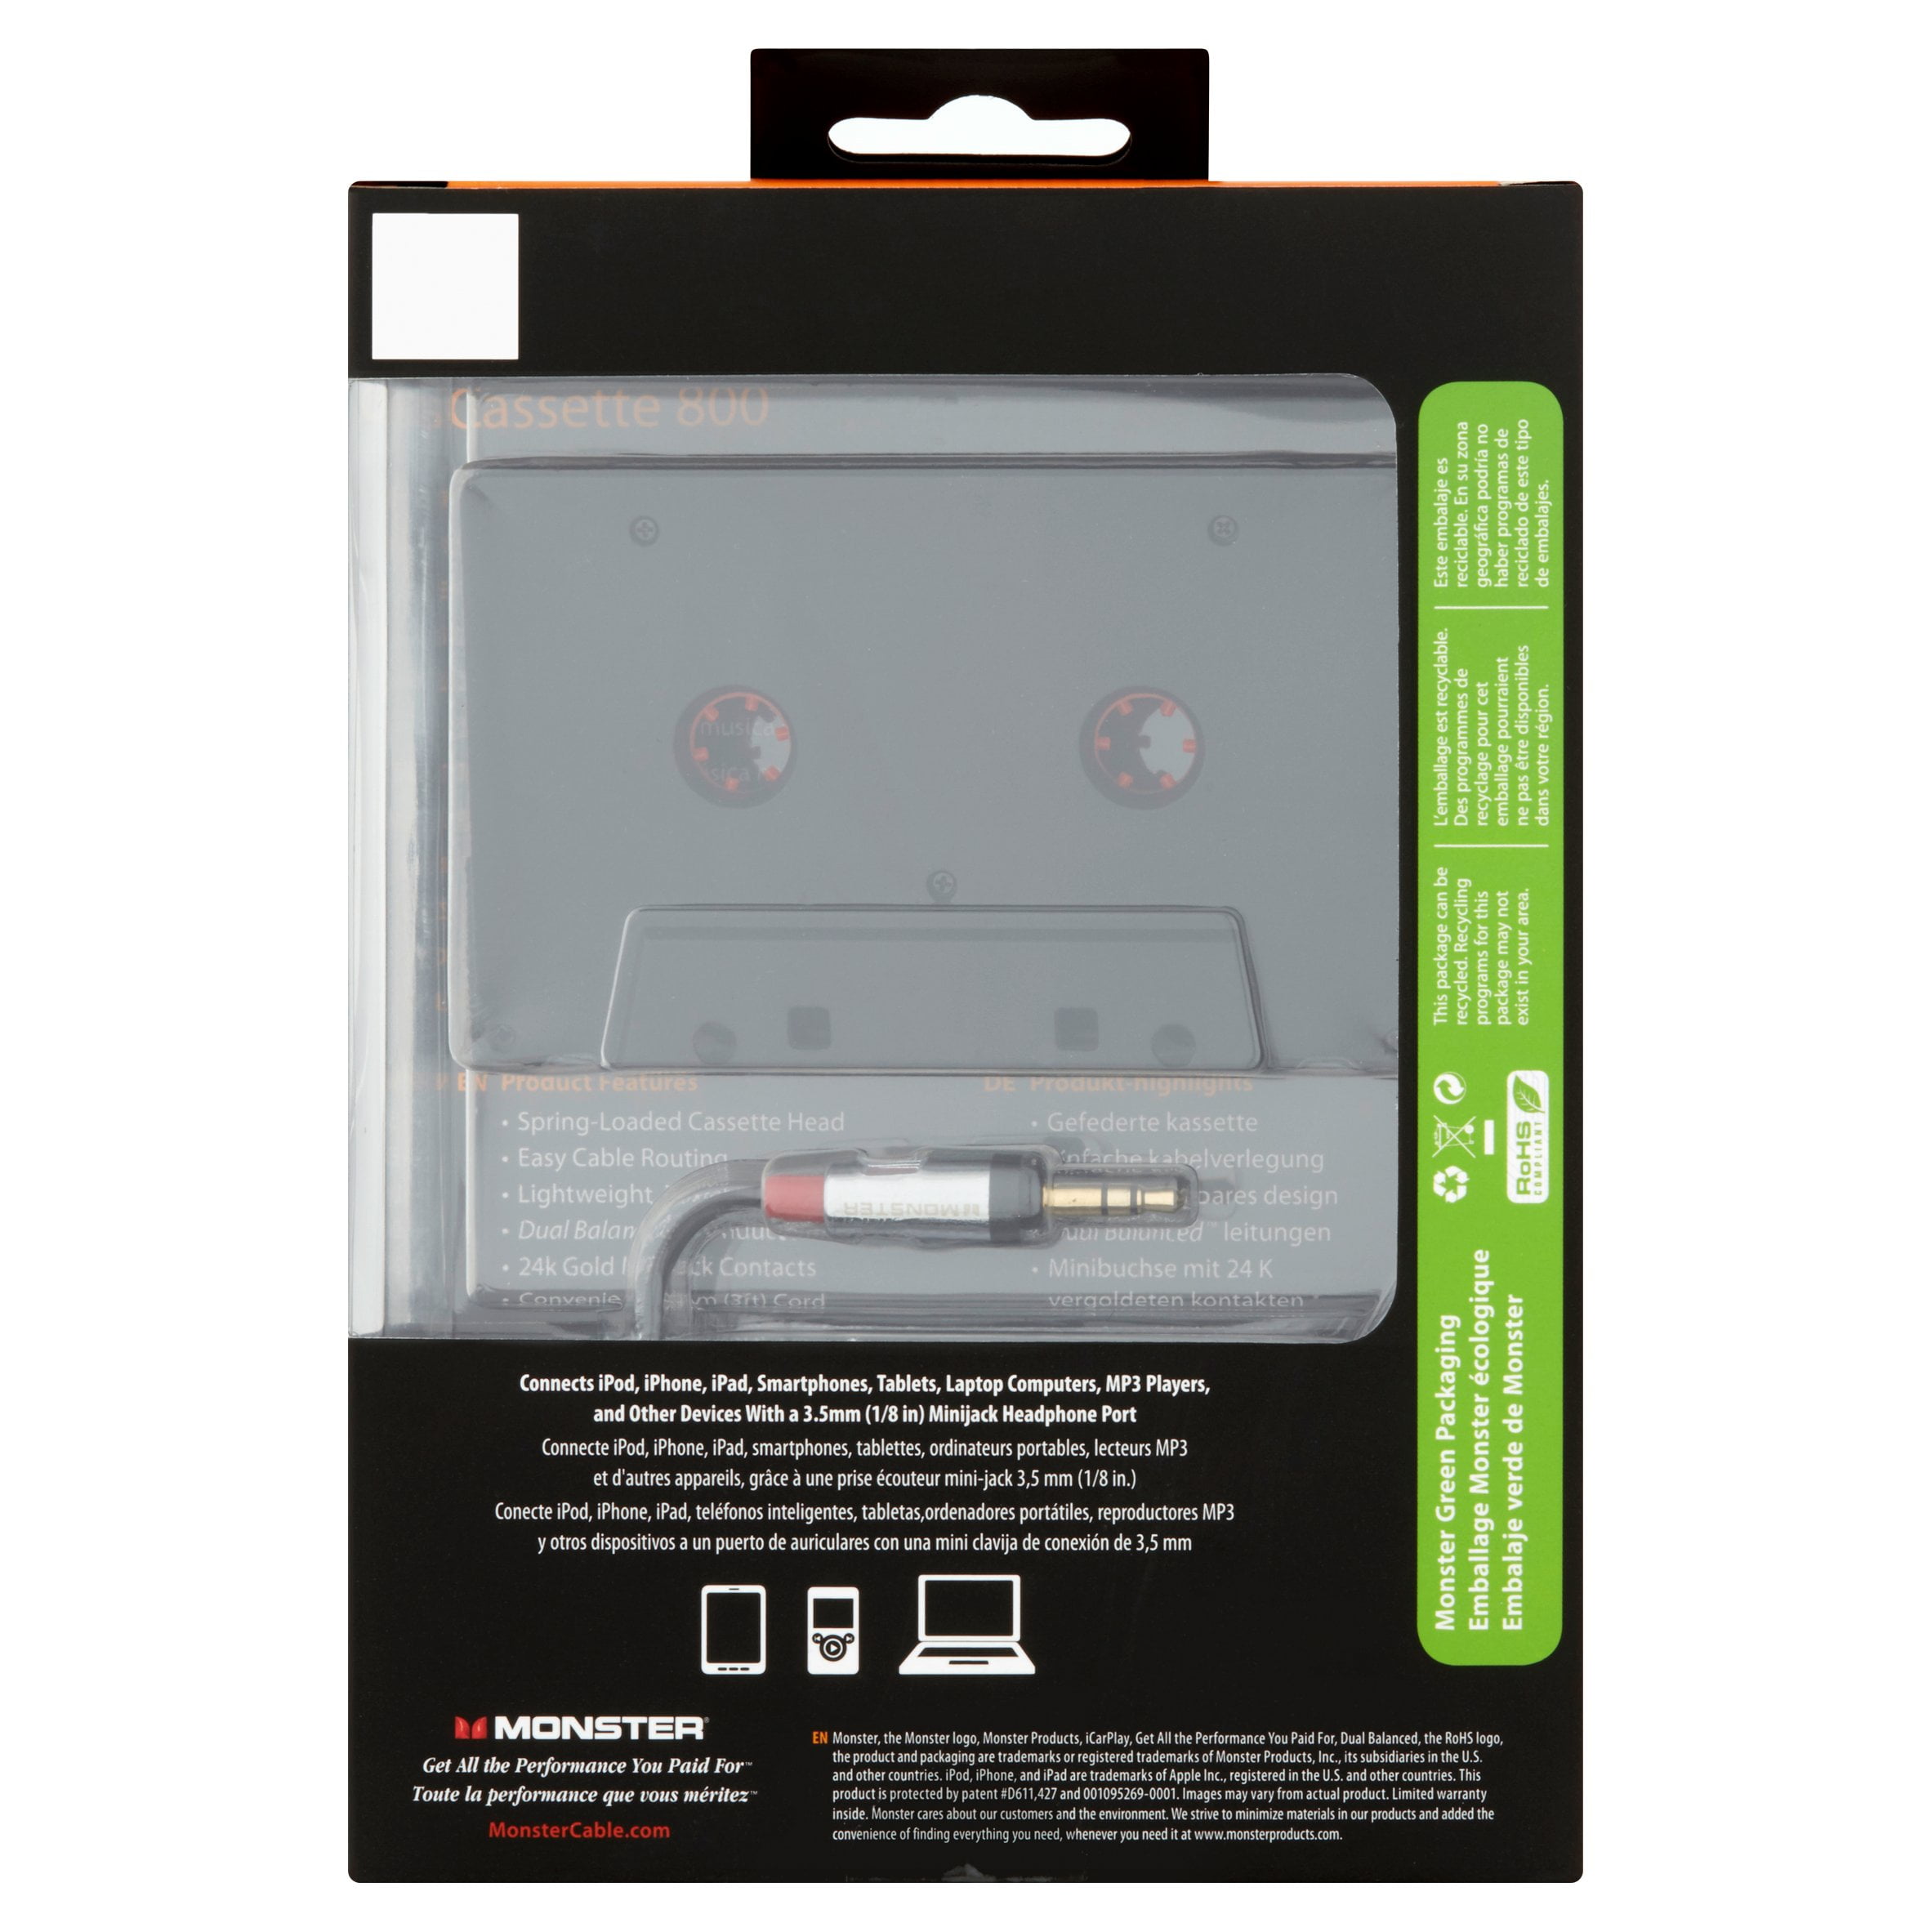 Monster Cable iCarPlay Cassette Adapter for iPod and iPhone